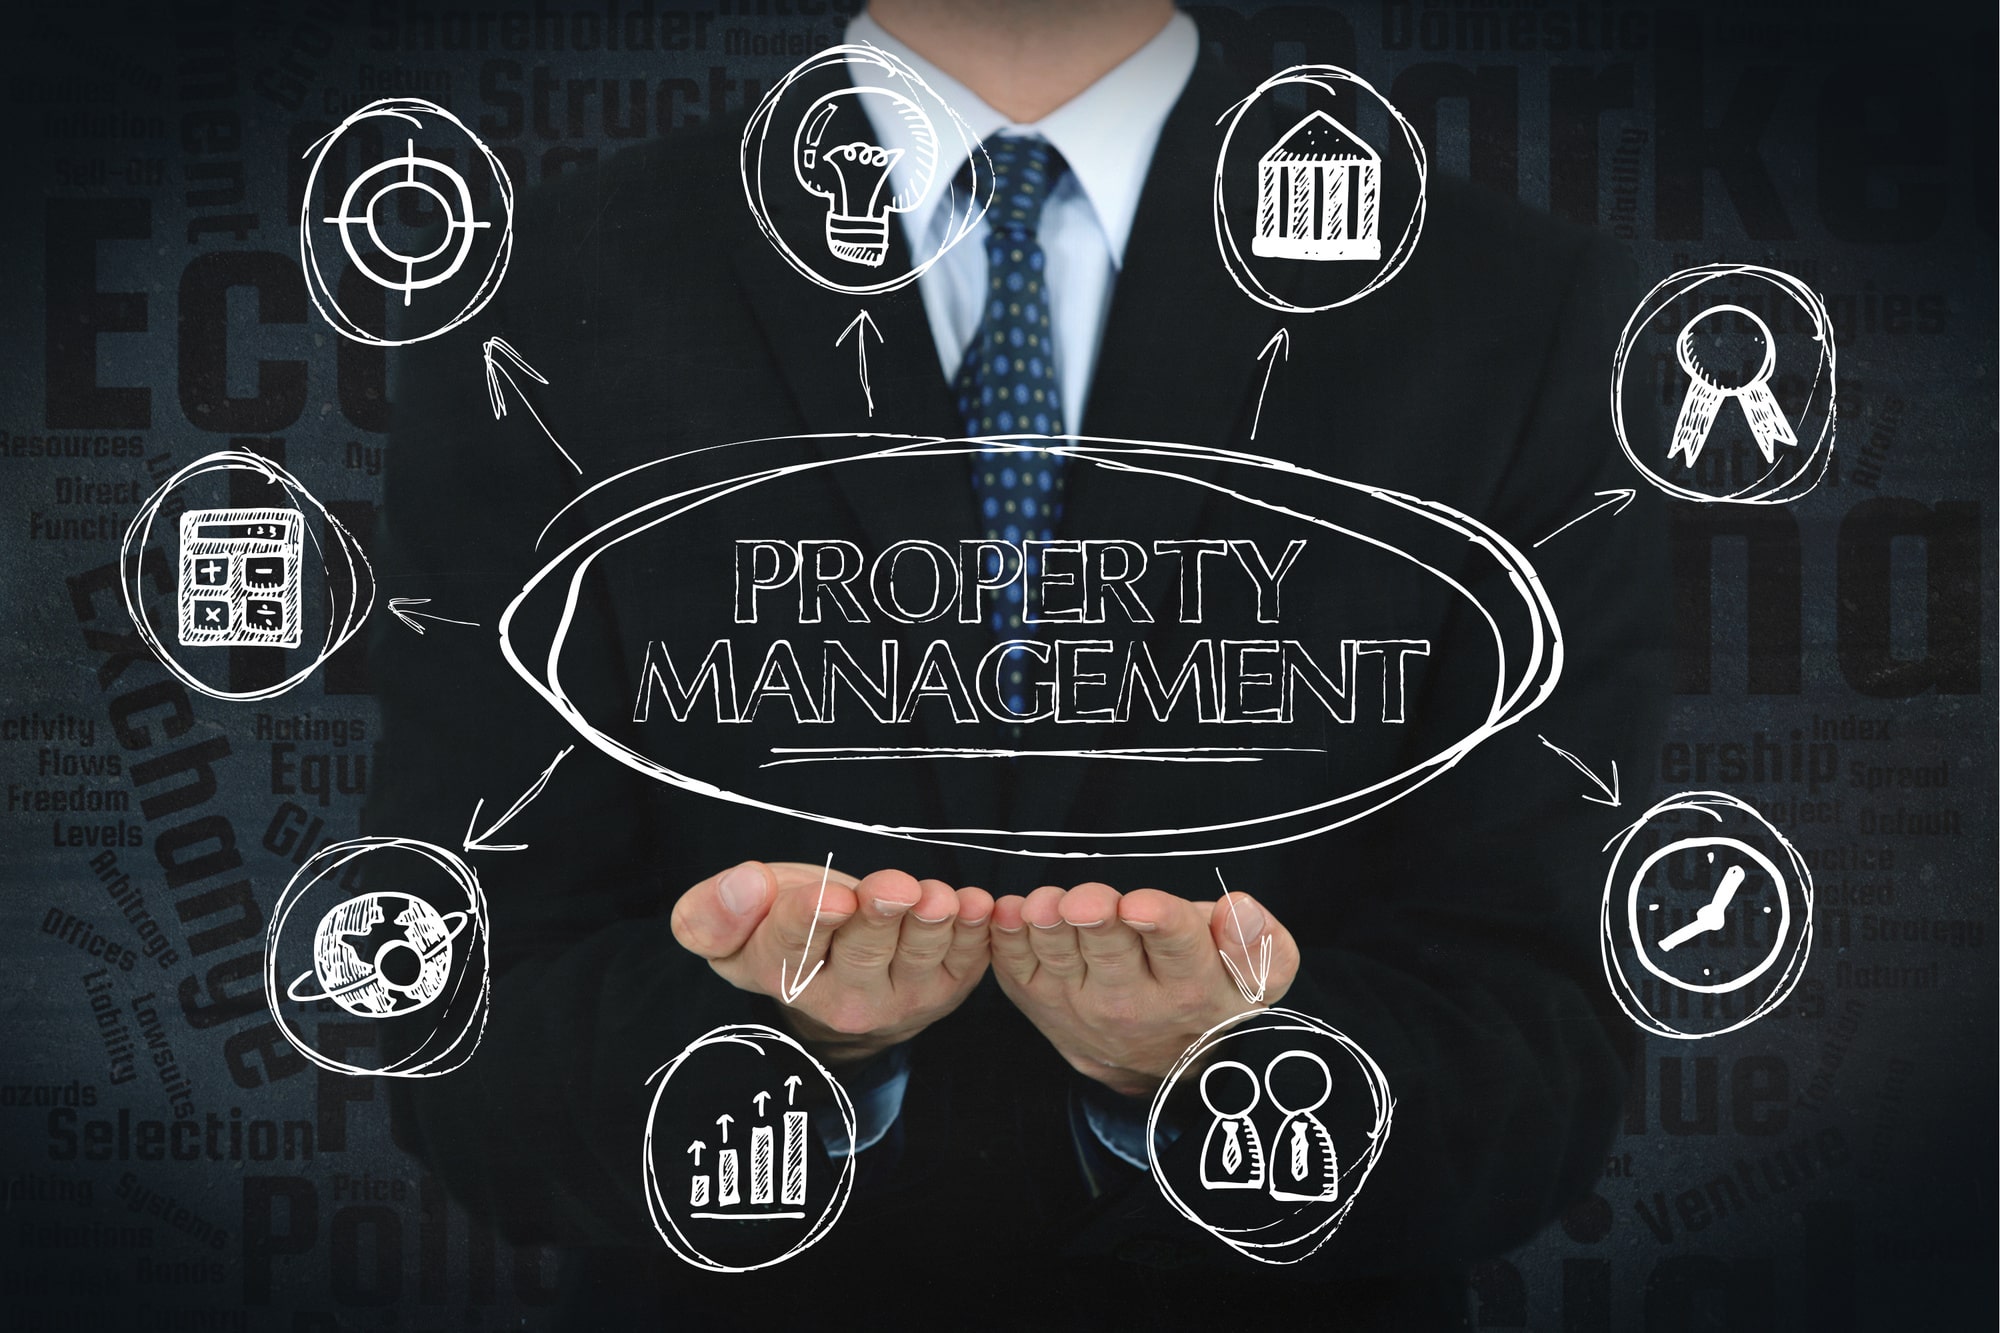 5 Questions to Ask Before Hiring a Property Management Company